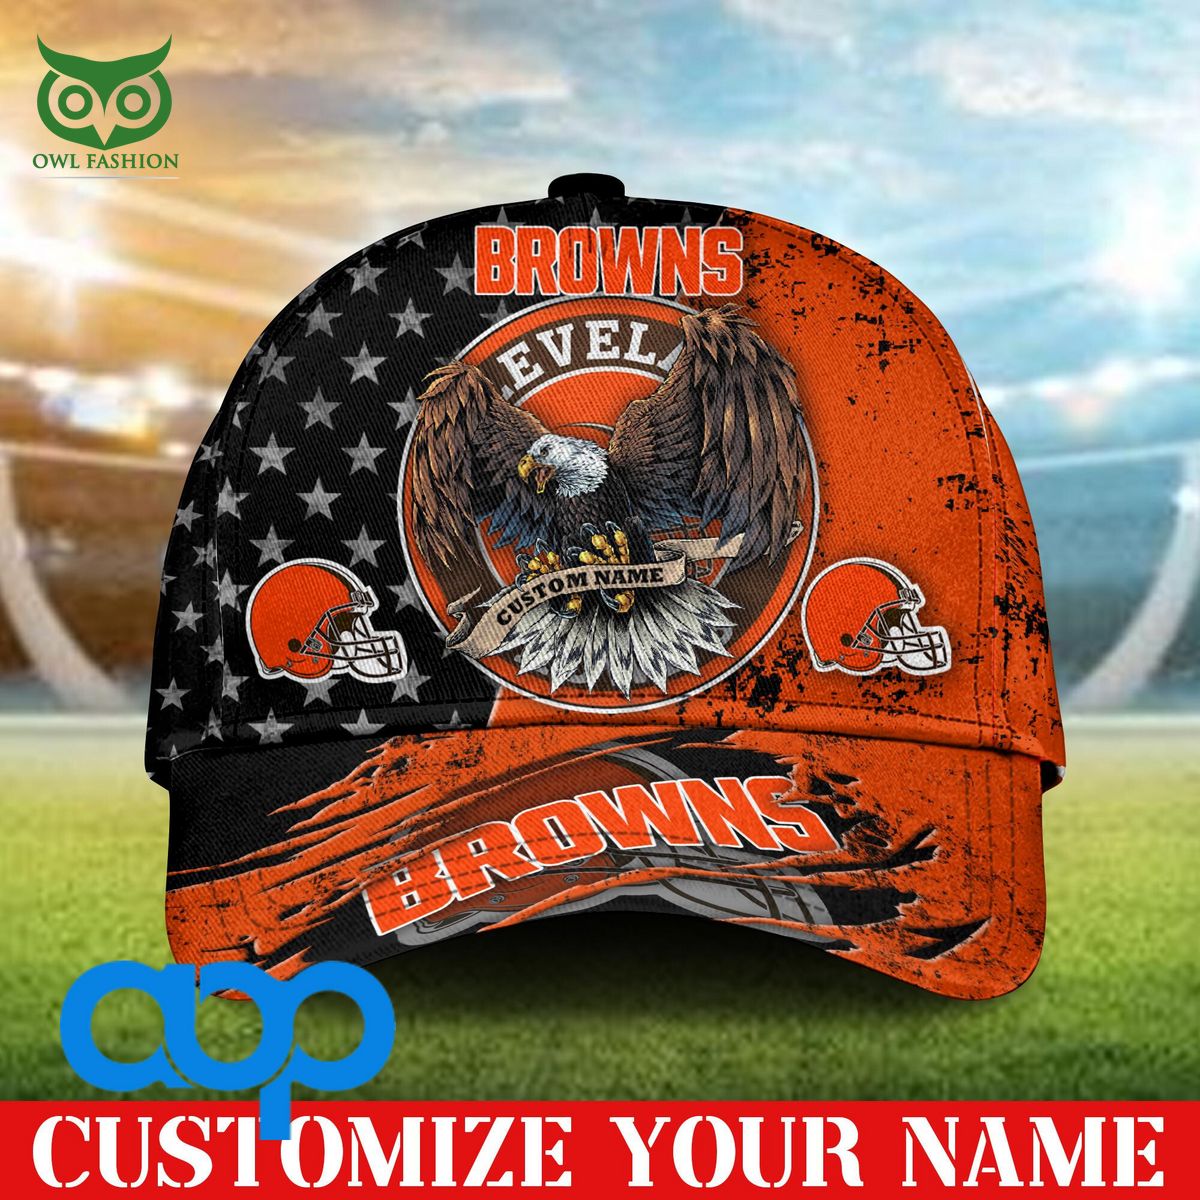 cleveland browns nfl bald eagle customized classic cap 1 mFvPS